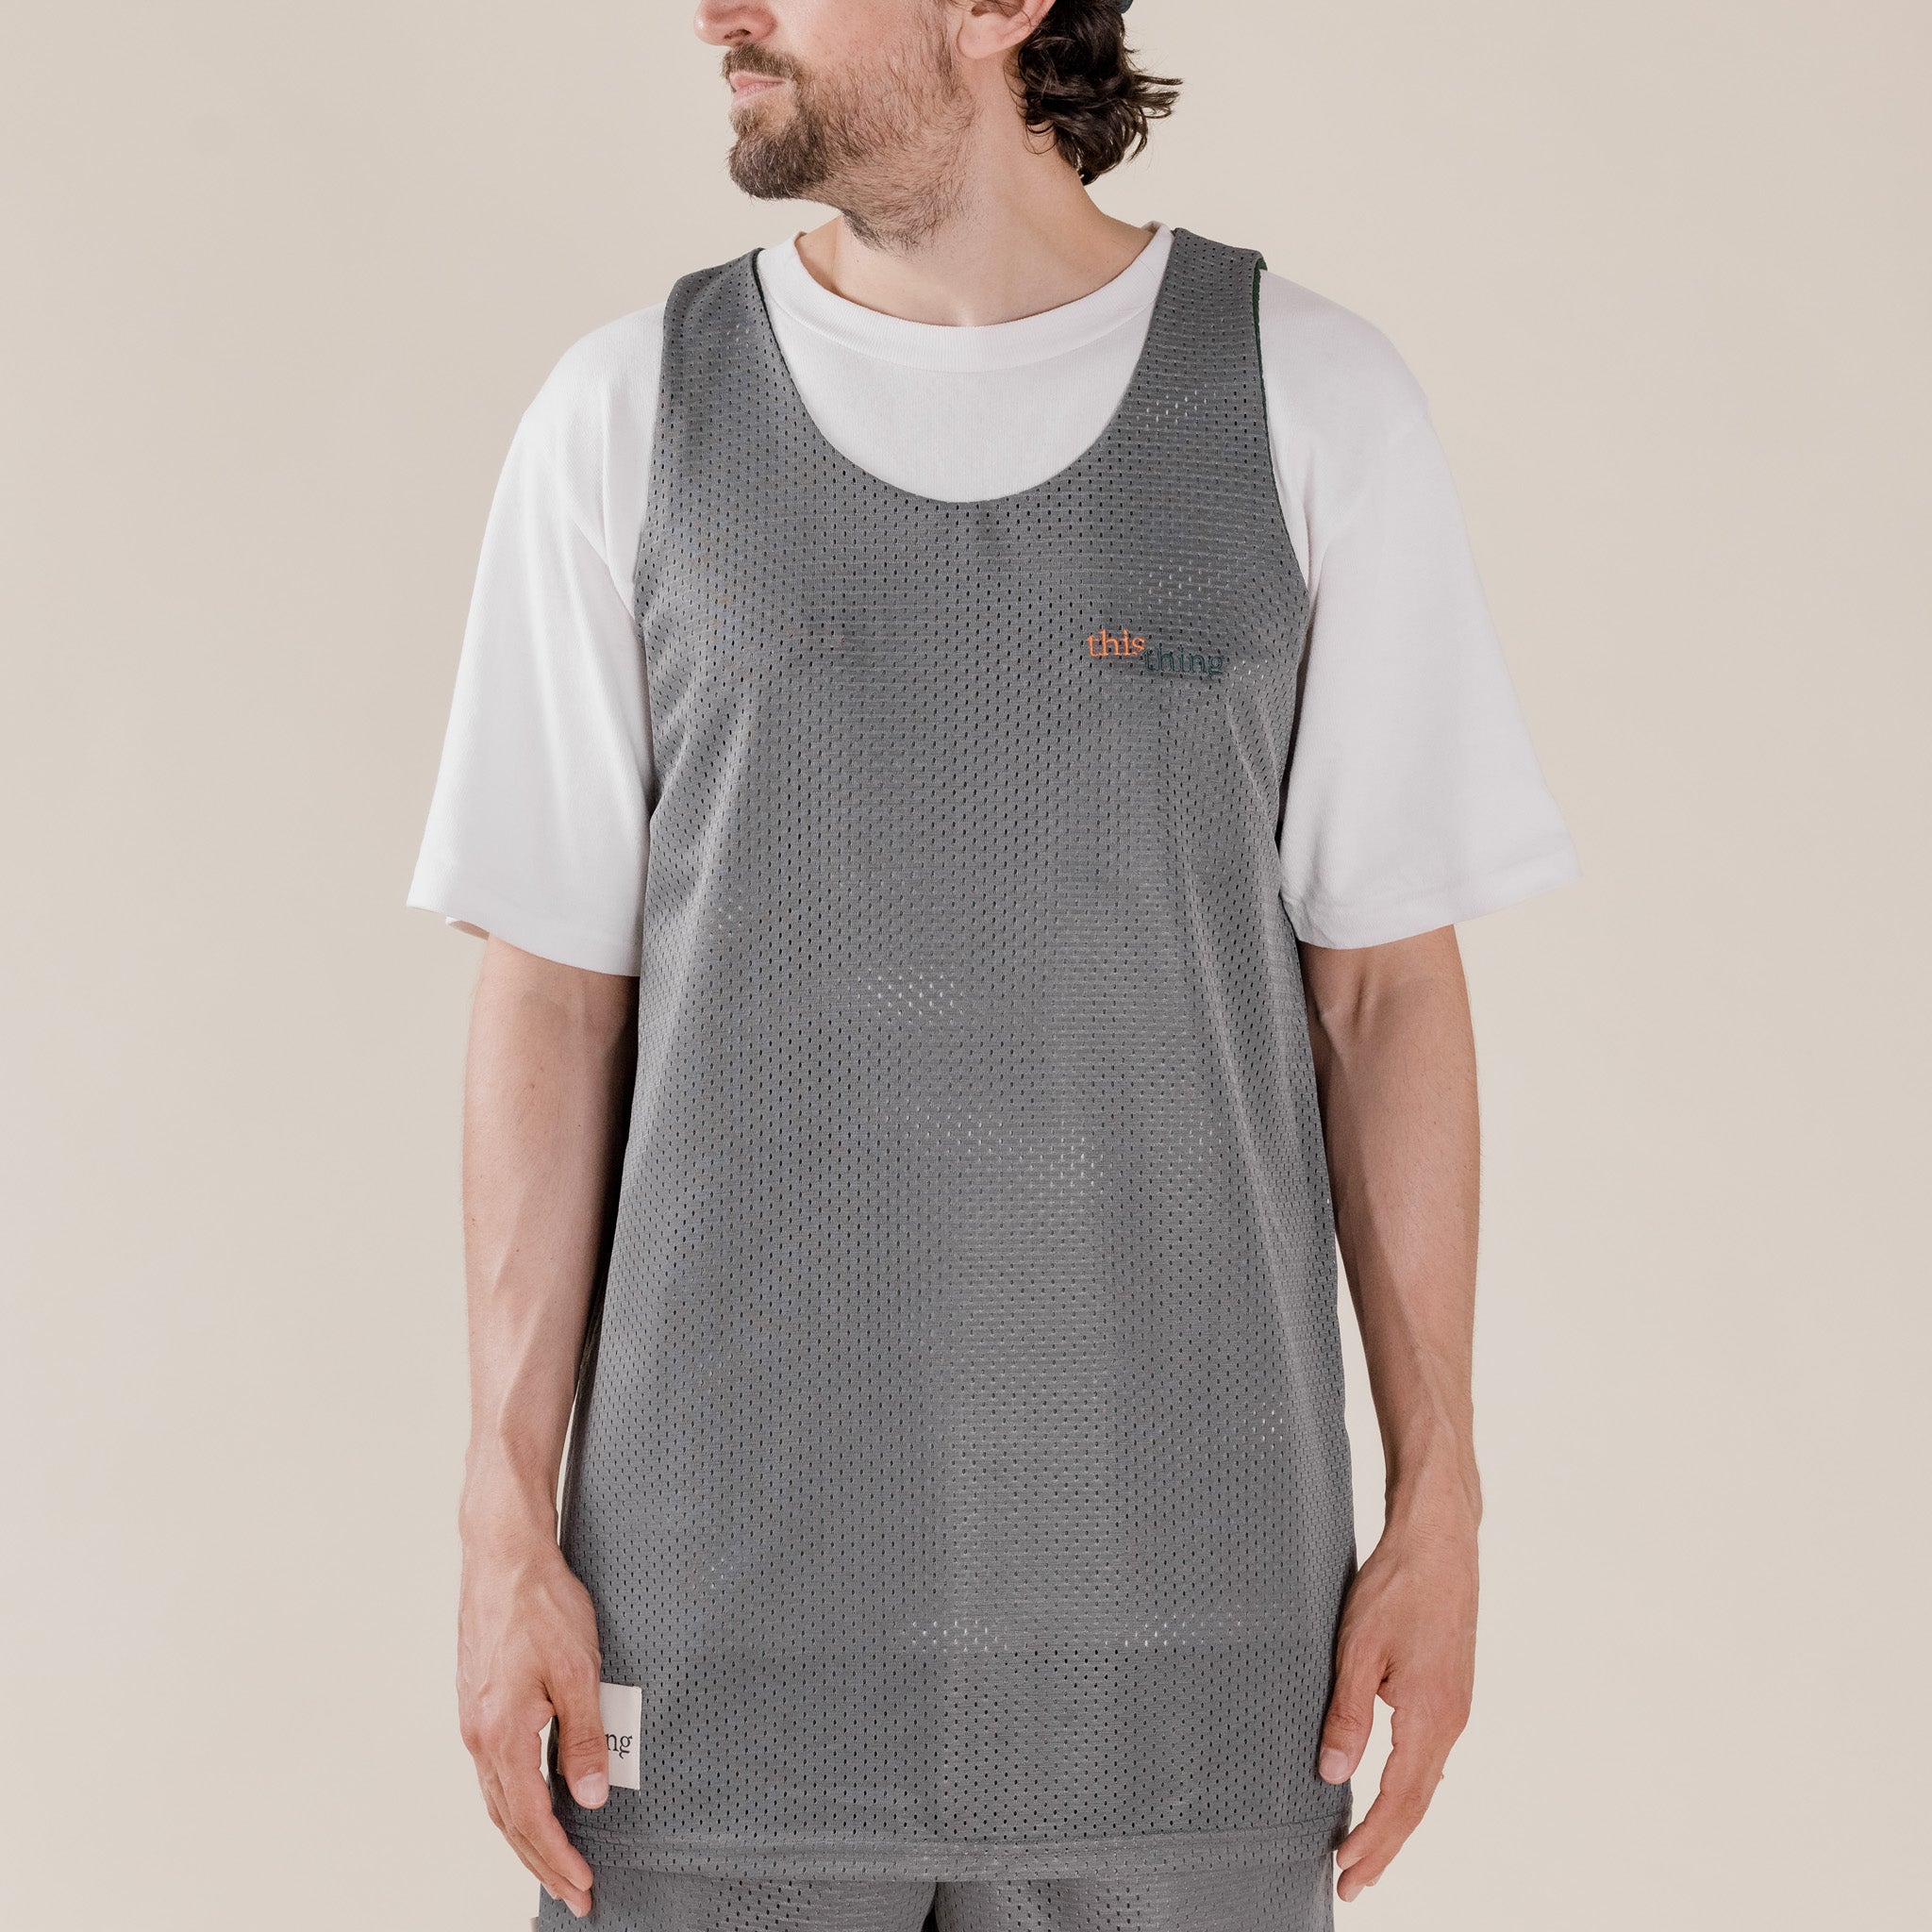 This Thing - Made in USA Reversible Mesh Vest - Athletic Grey / Forest Green